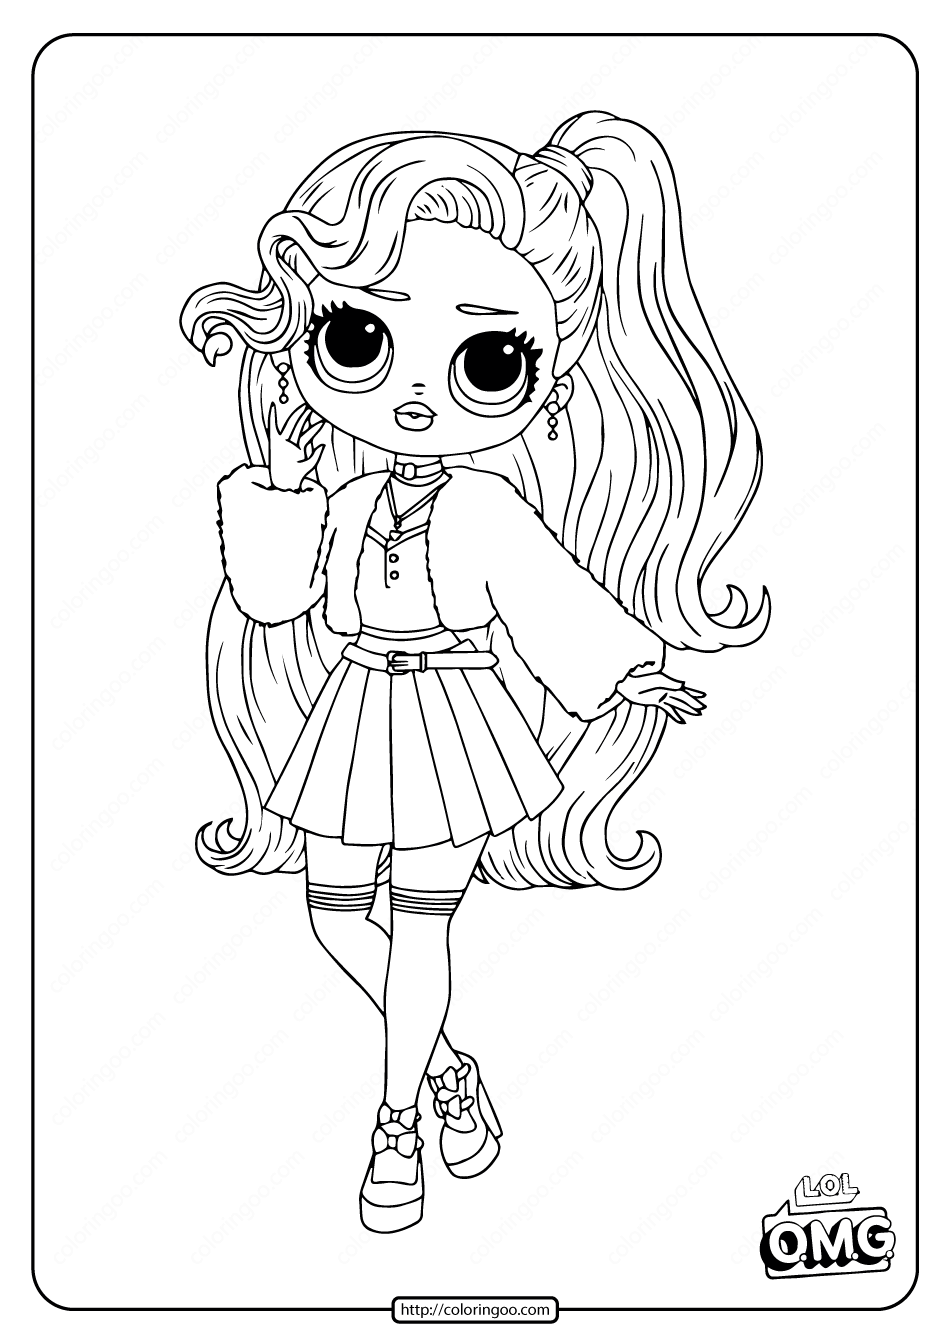 LOL Coloring Pages FREE Printable 128